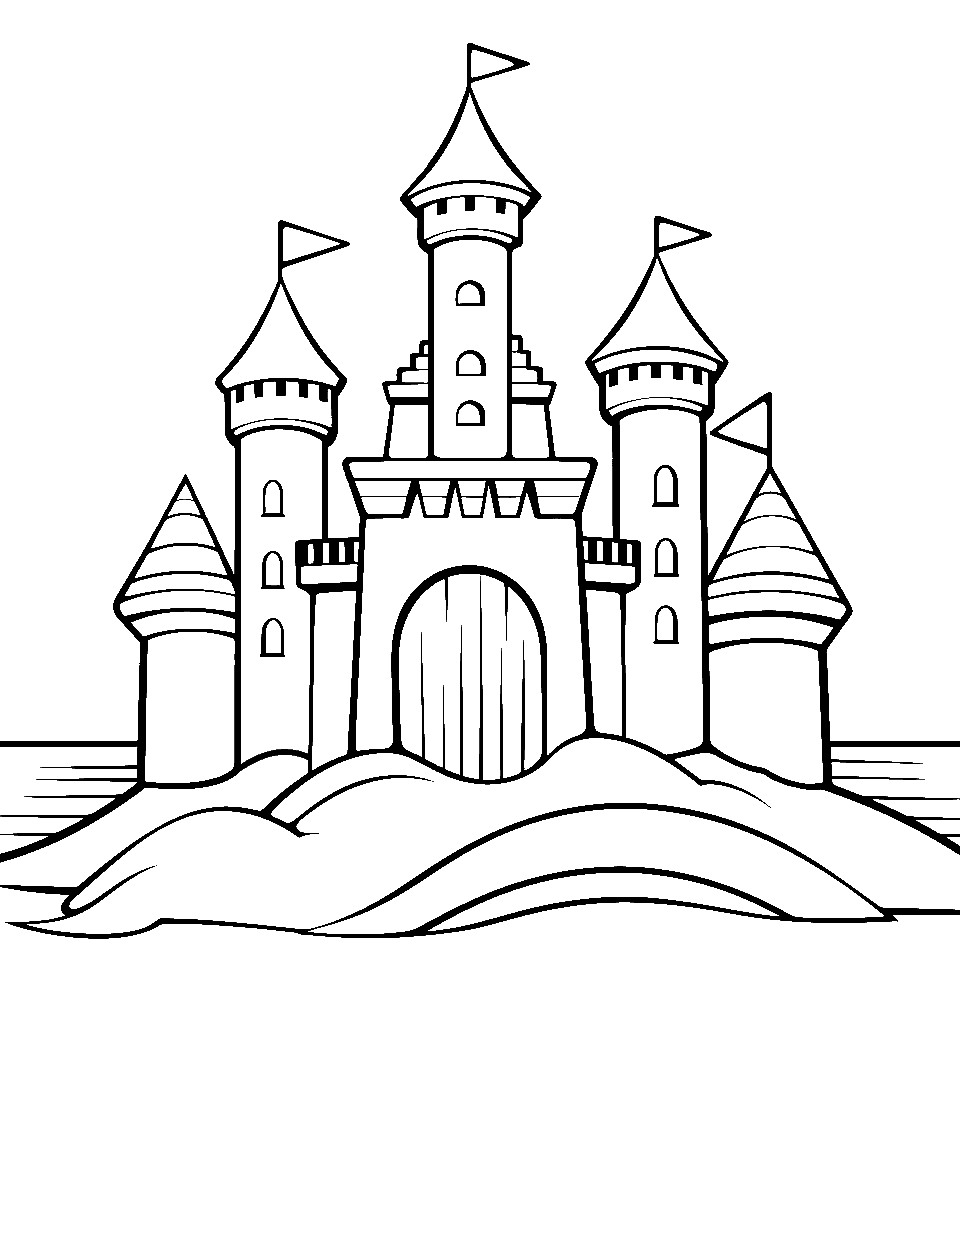 Sandcastle on the Beach Ocean Coloring Page - A detailed sandcastle on the shore, with the ocean in the background.